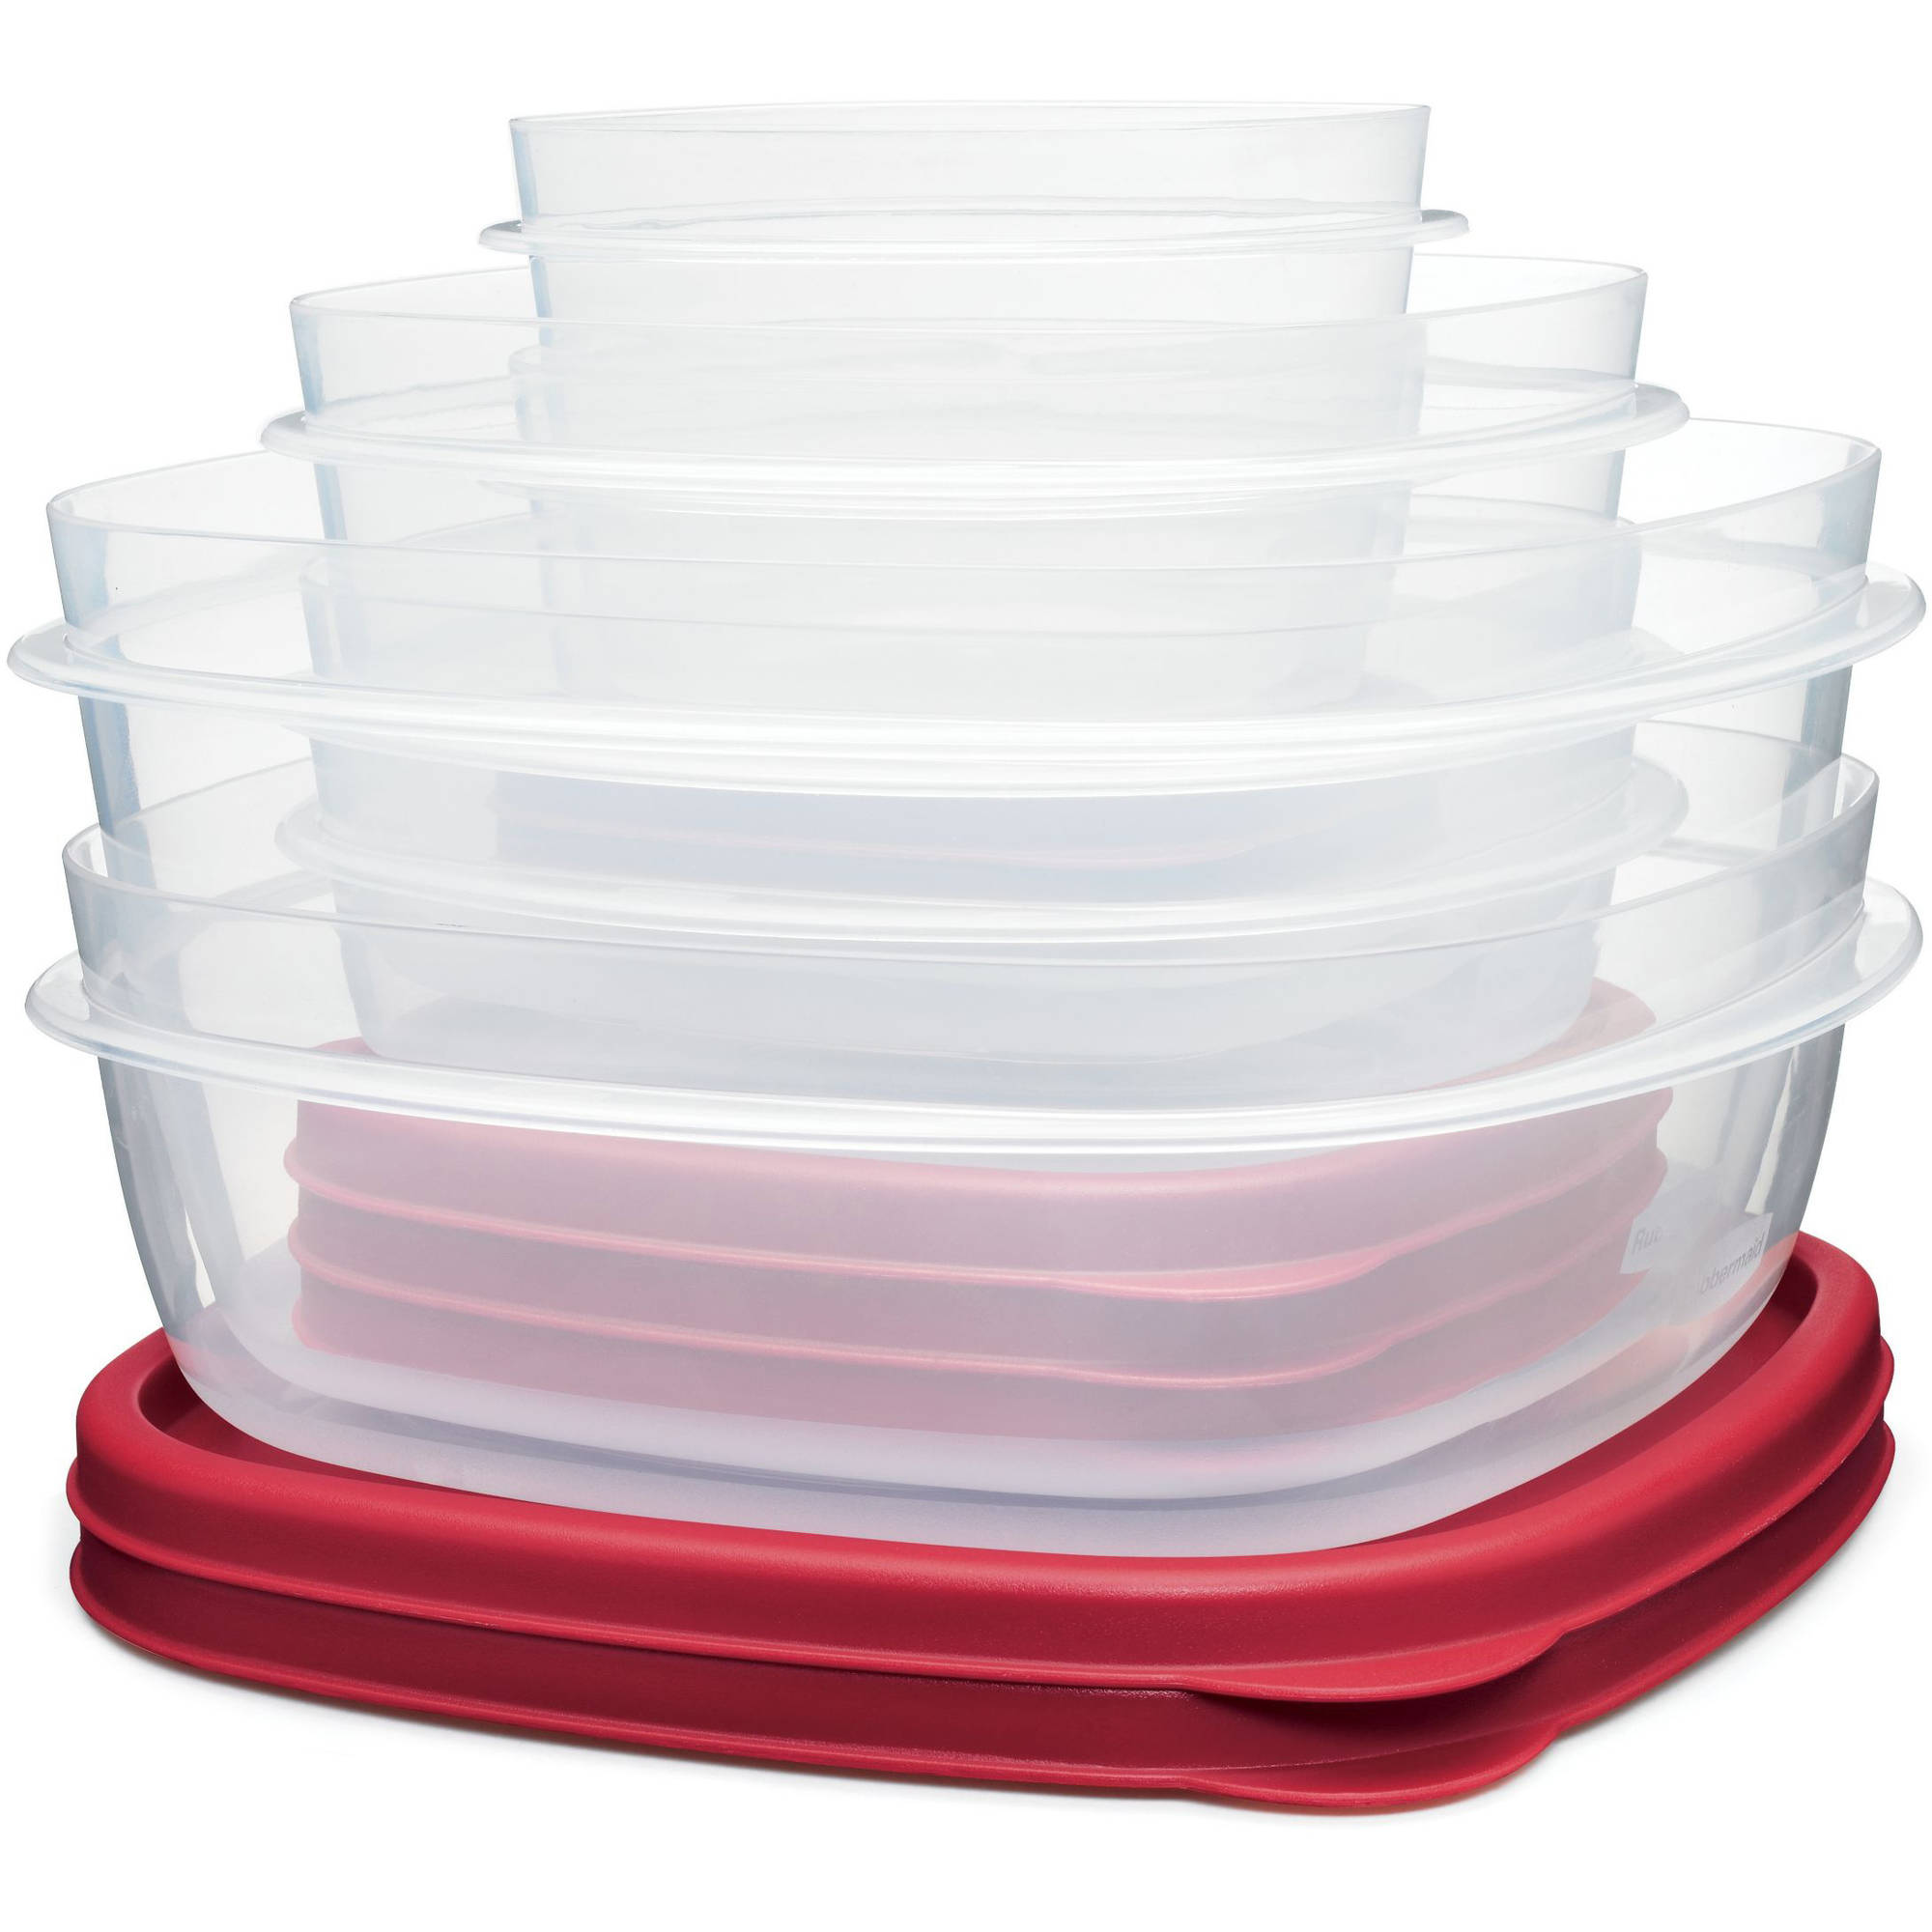 Rubbermaid Easy Find Lids Food Storage Containers with Lids - BPA Free Durable Plastic Food Containers Great for Home, School, Travel - Freezer, Microwave, and Dishwasher Safe - 28 Piece Set - Red - image 4 of 7